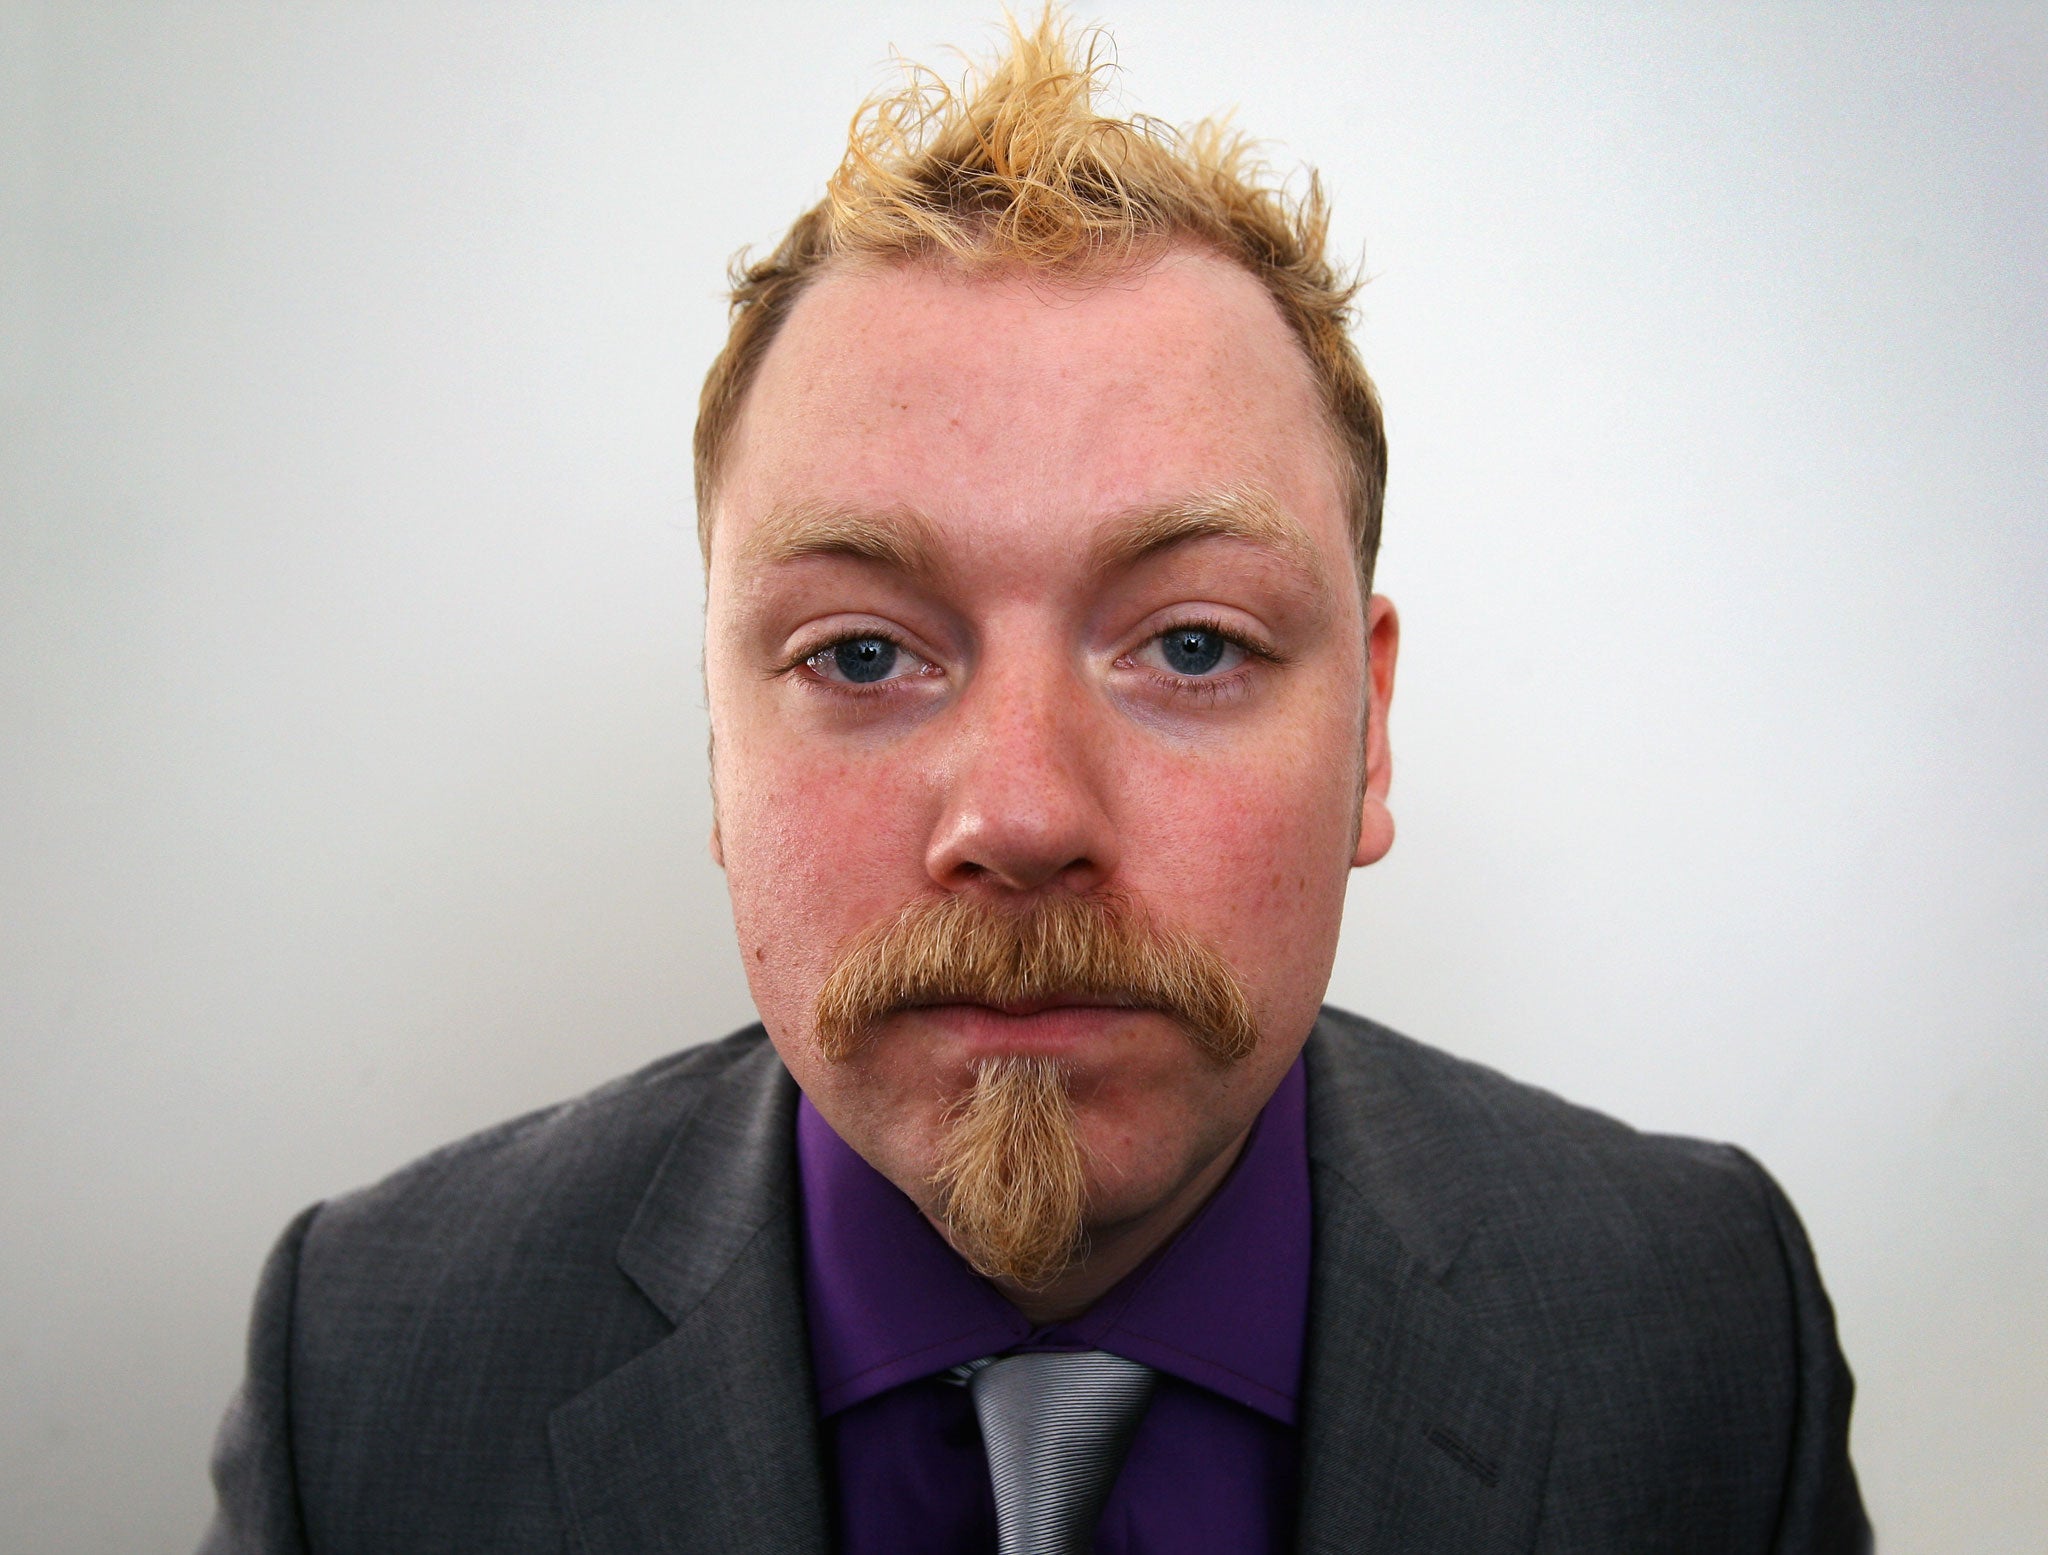 Rufus Hound is going to run in the next European elections